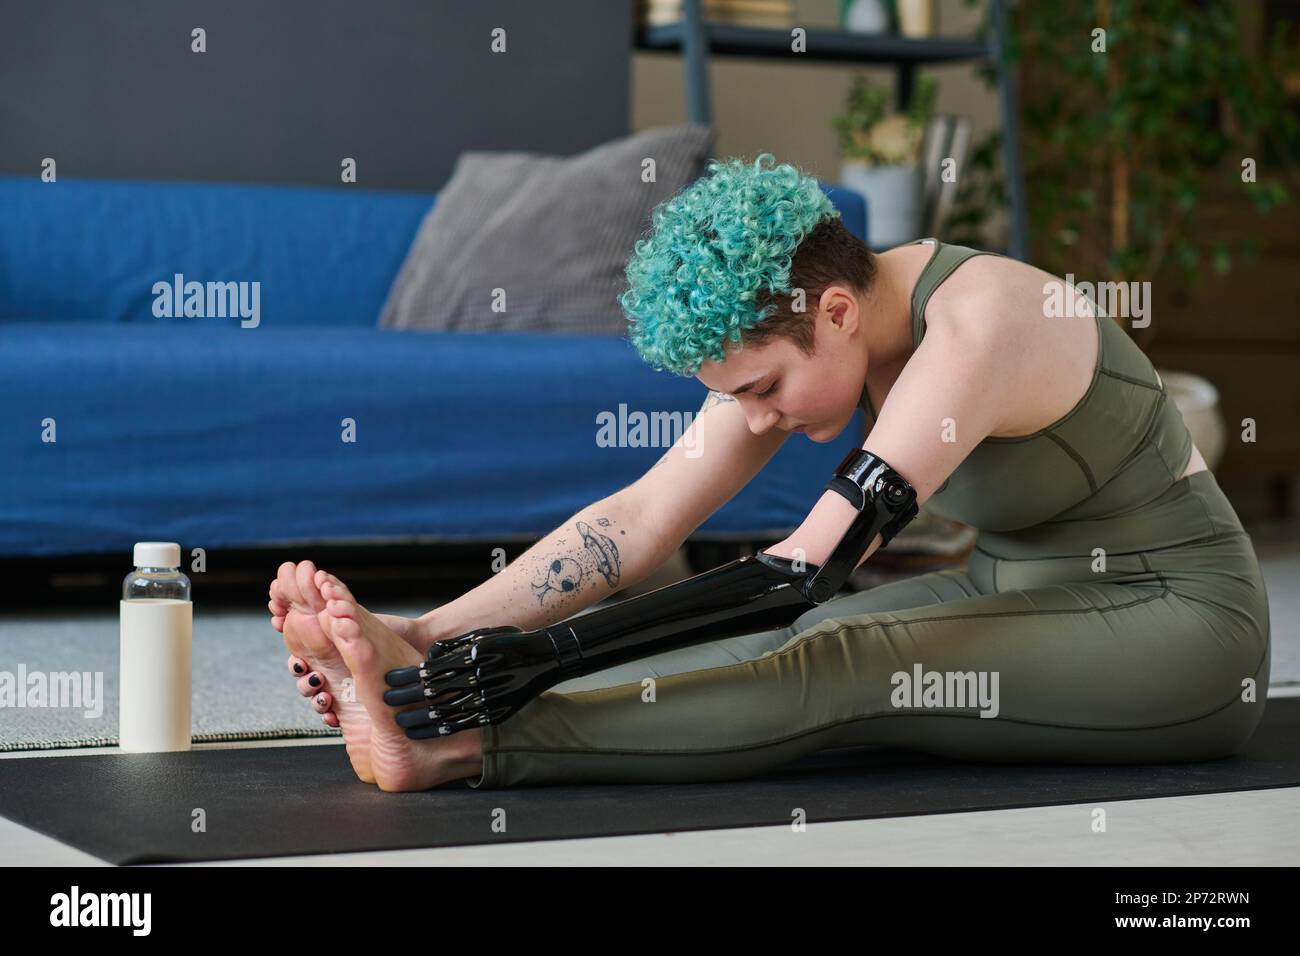 Woman with prosthetic arm exercising on exercise mat during training at home Stock Photo